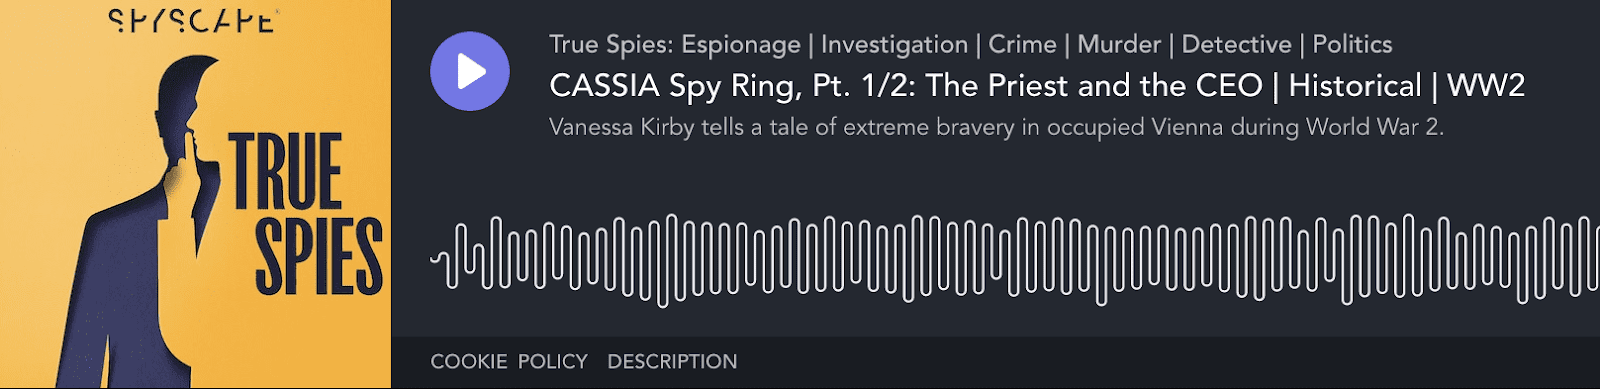 The Cassia Spy Ring Podcast